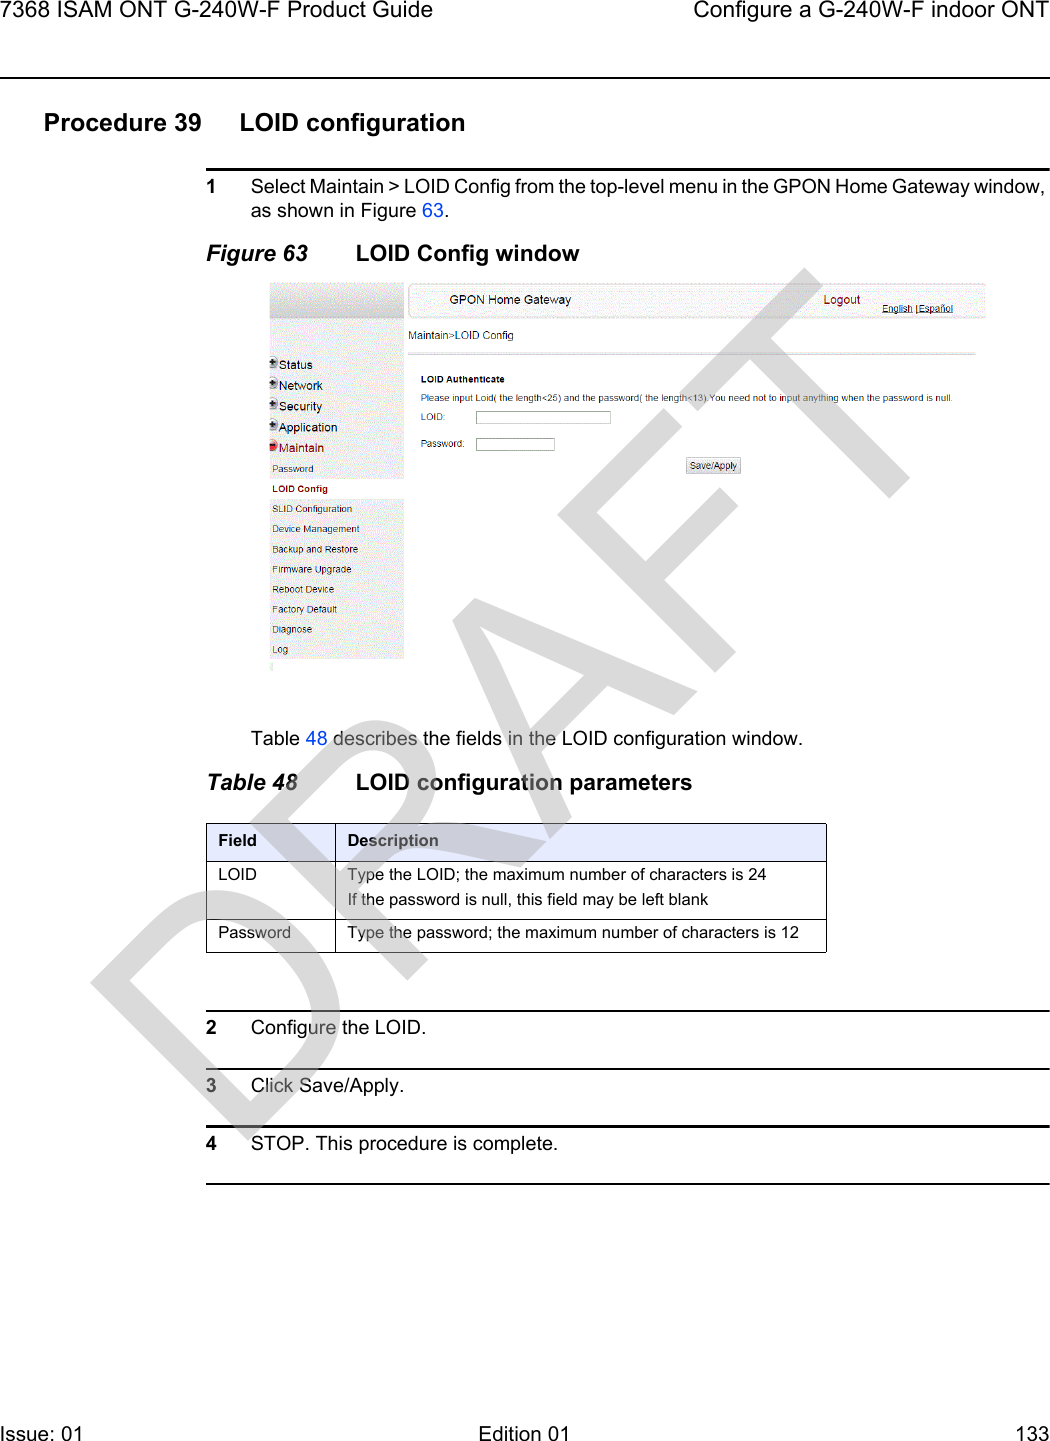 7368 ISAM ONT G-240W-F Product Guide Configure a G-240W-F indoor ONTIssue: 01 Edition 01 133 Procedure 39 LOID configuration1Select Maintain &gt; LOID Config from the top-level menu in the GPON Home Gateway window, as shown in Figure 63.Figure 63 LOID Config windowTable 48 describes the fields in the LOID configuration window.Table 48 LOID configuration parameters2Configure the LOID.3Click Save/Apply.4STOP. This procedure is complete.Field DescriptionLOID Type the LOID; the maximum number of characters is 24If the password is null, this field may be left blankPassword Type the password; the maximum number of characters is 12DRAFT